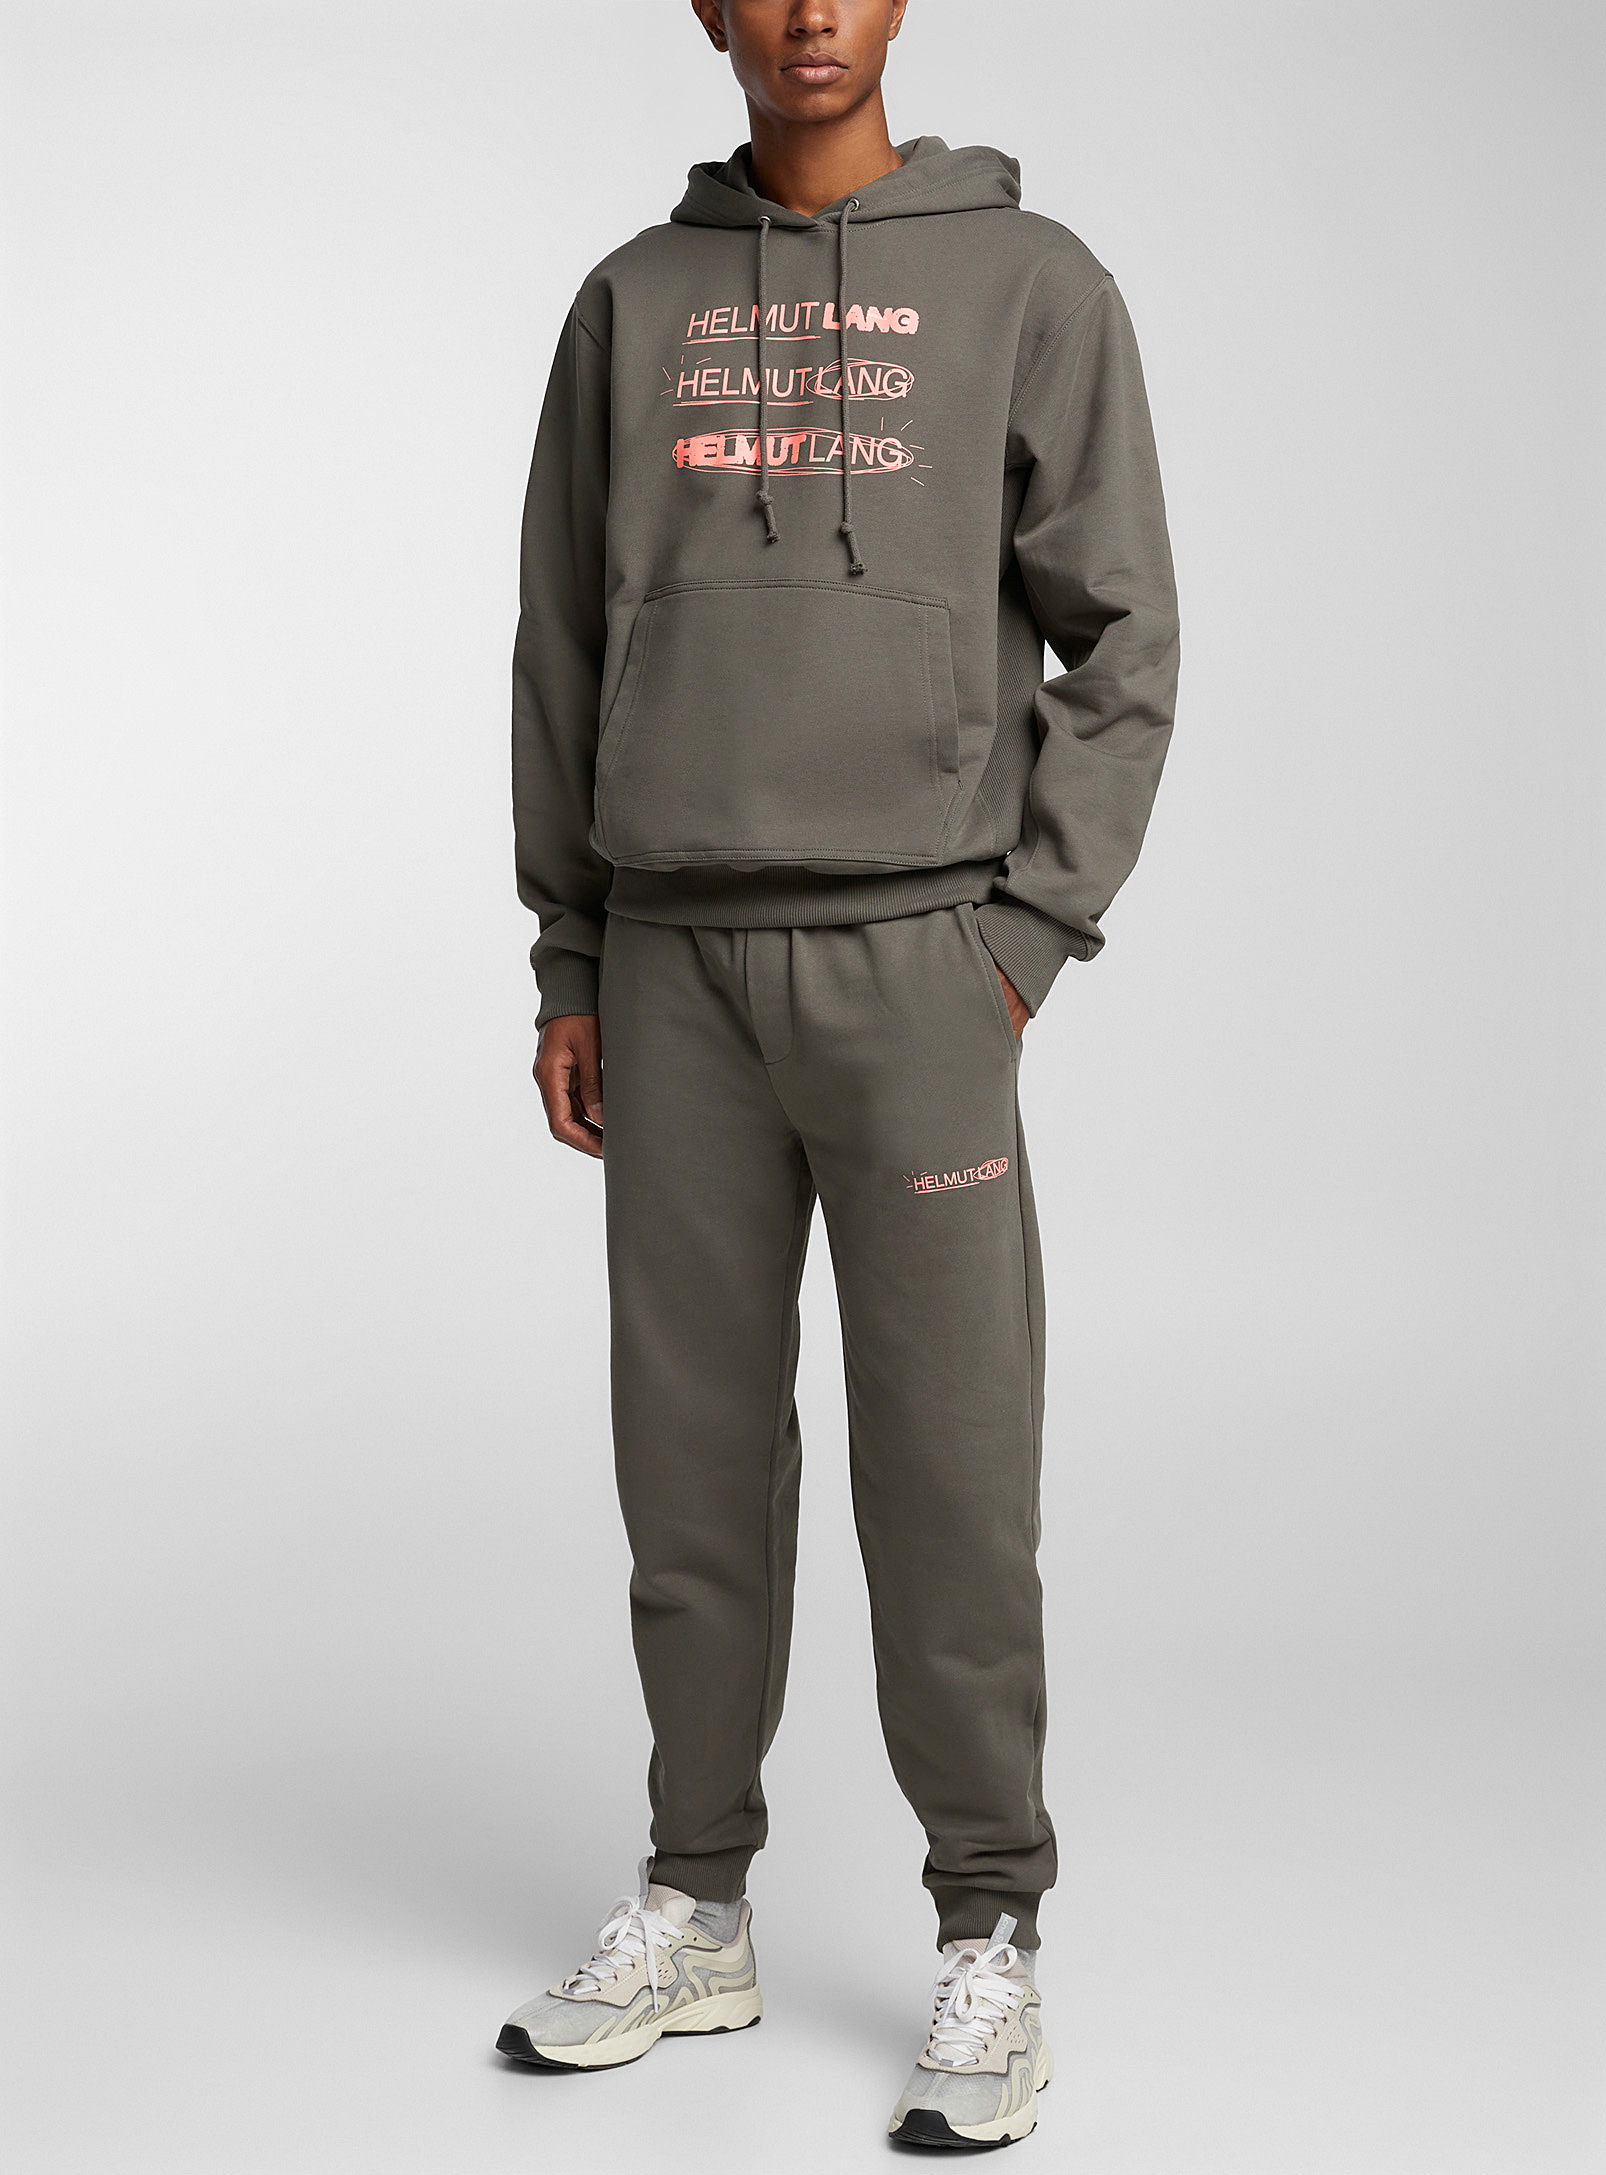 Helmut Lang - Men's Space annotated signature jogger